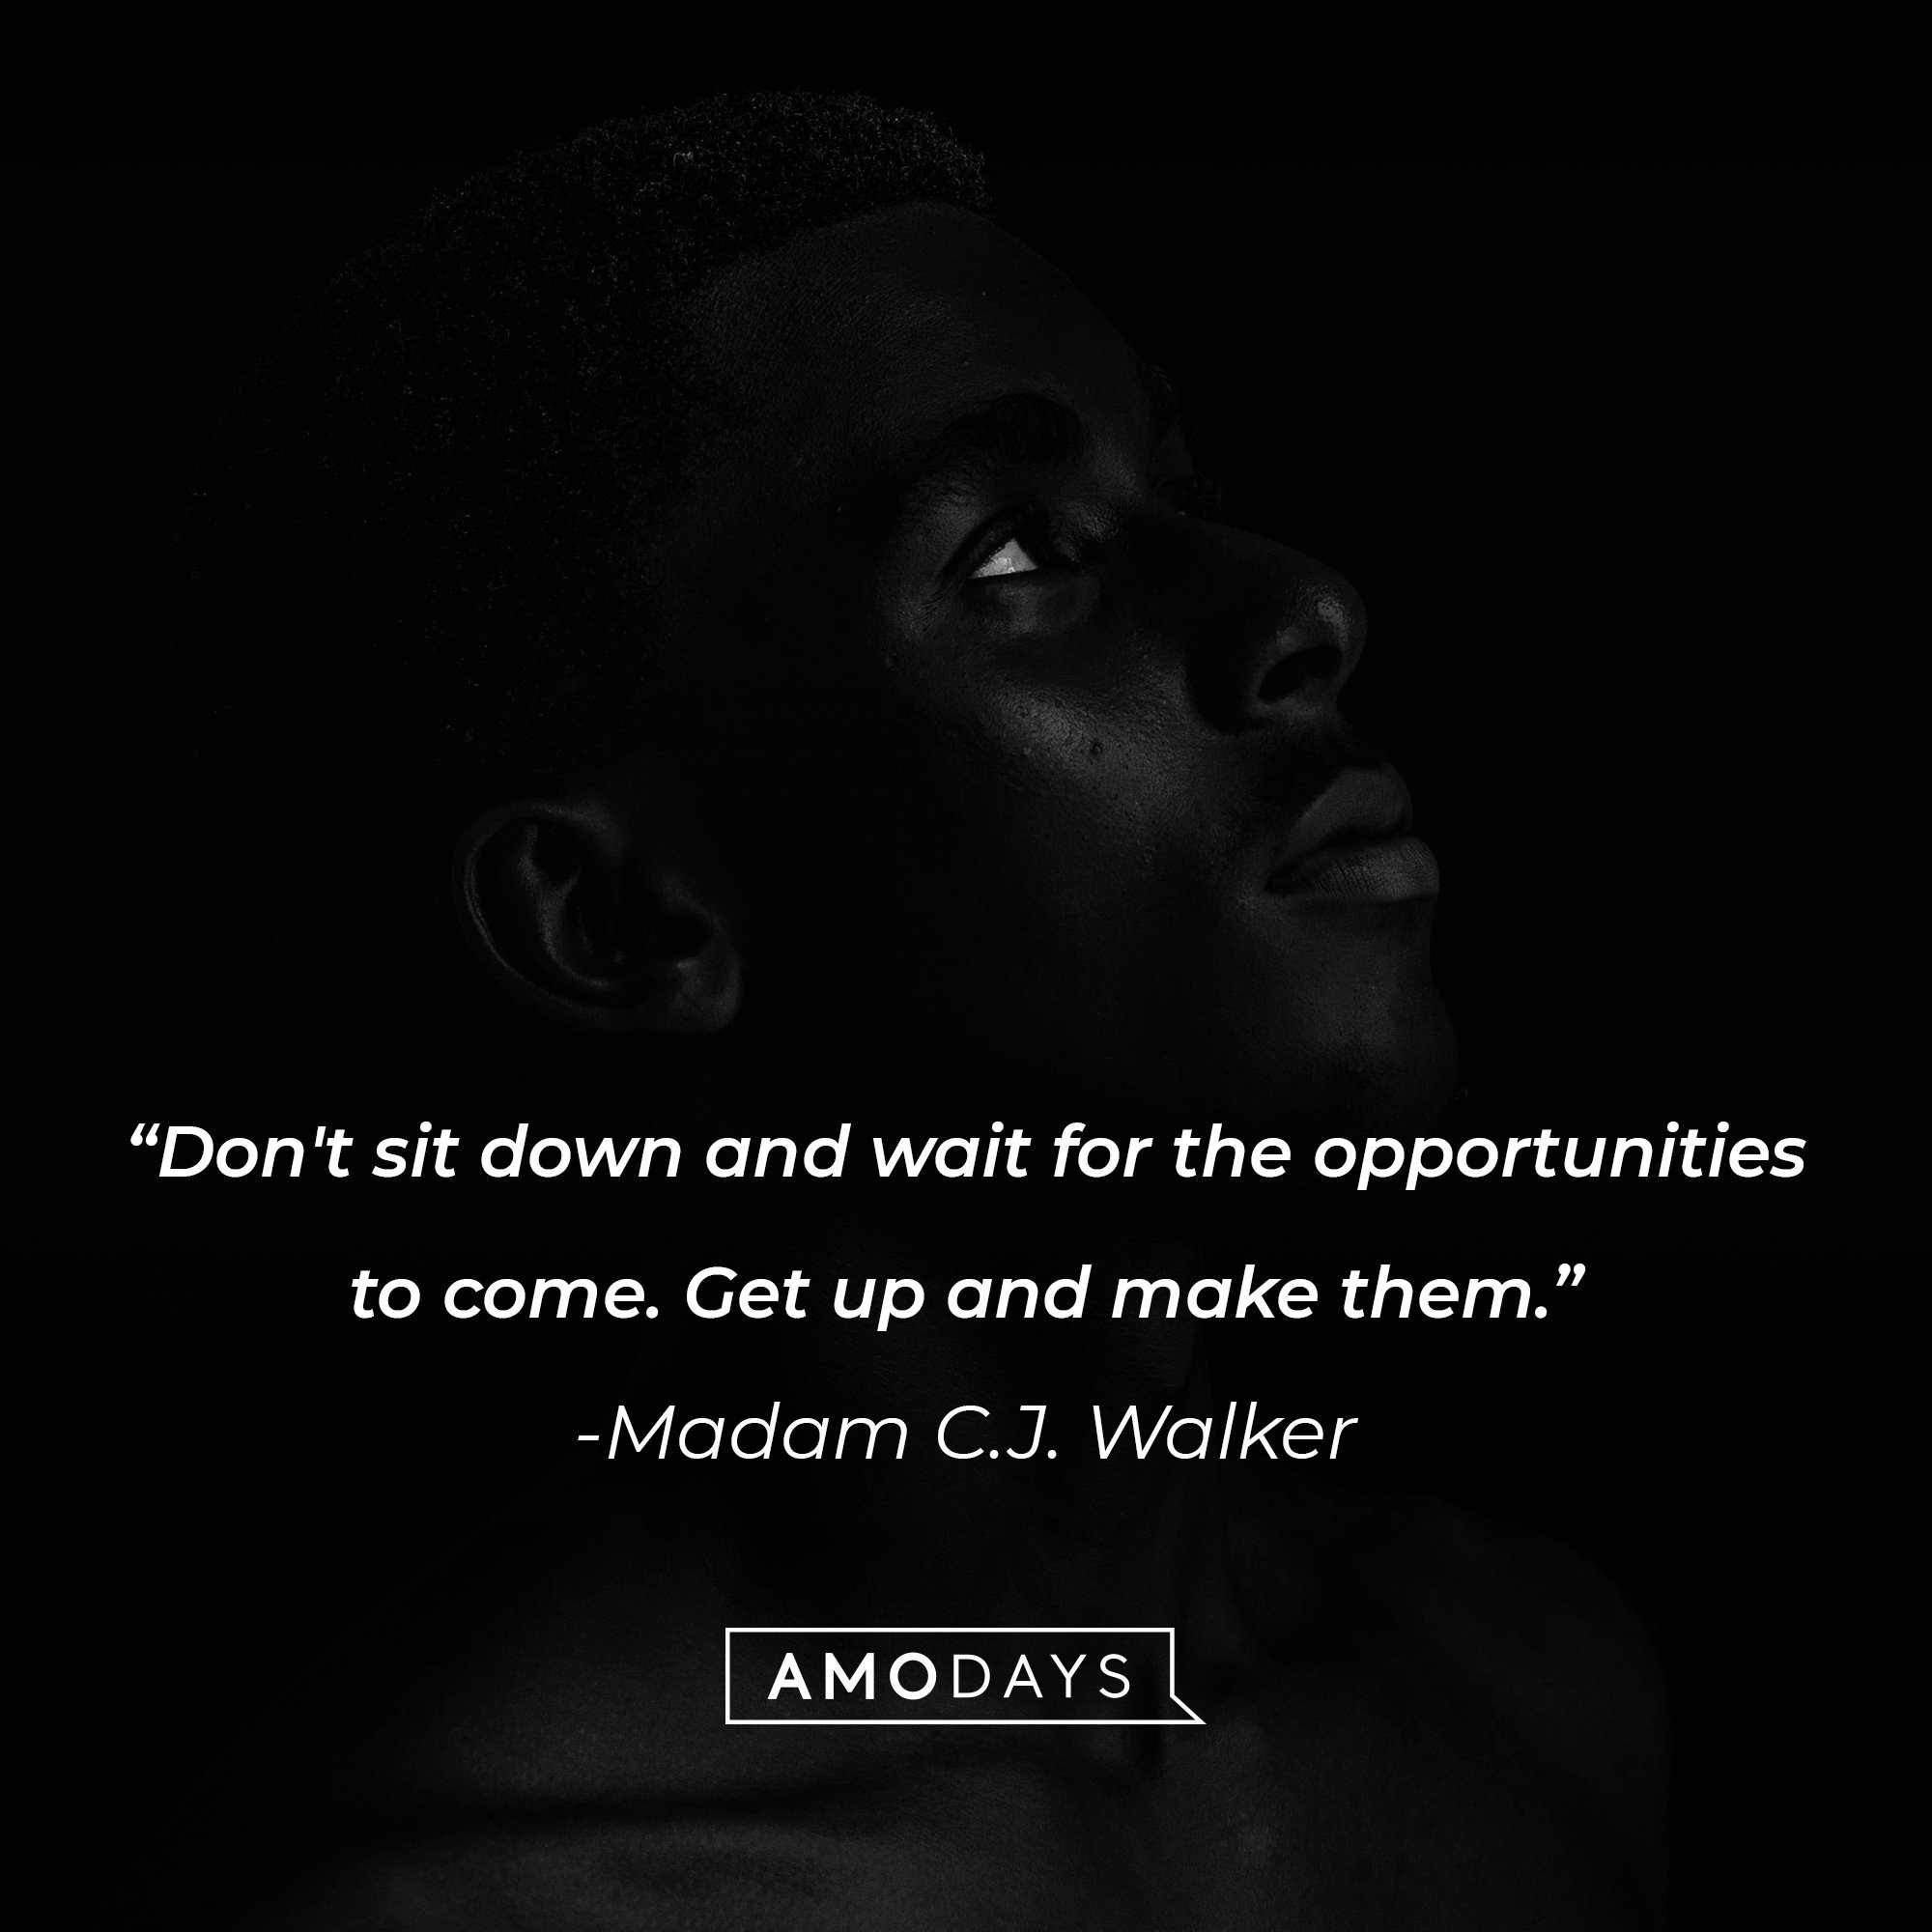 Madam C.J. Walker's quote: "Don't sit down and wait for the opportunities to come. Get up and make them." | Image: AmoDays